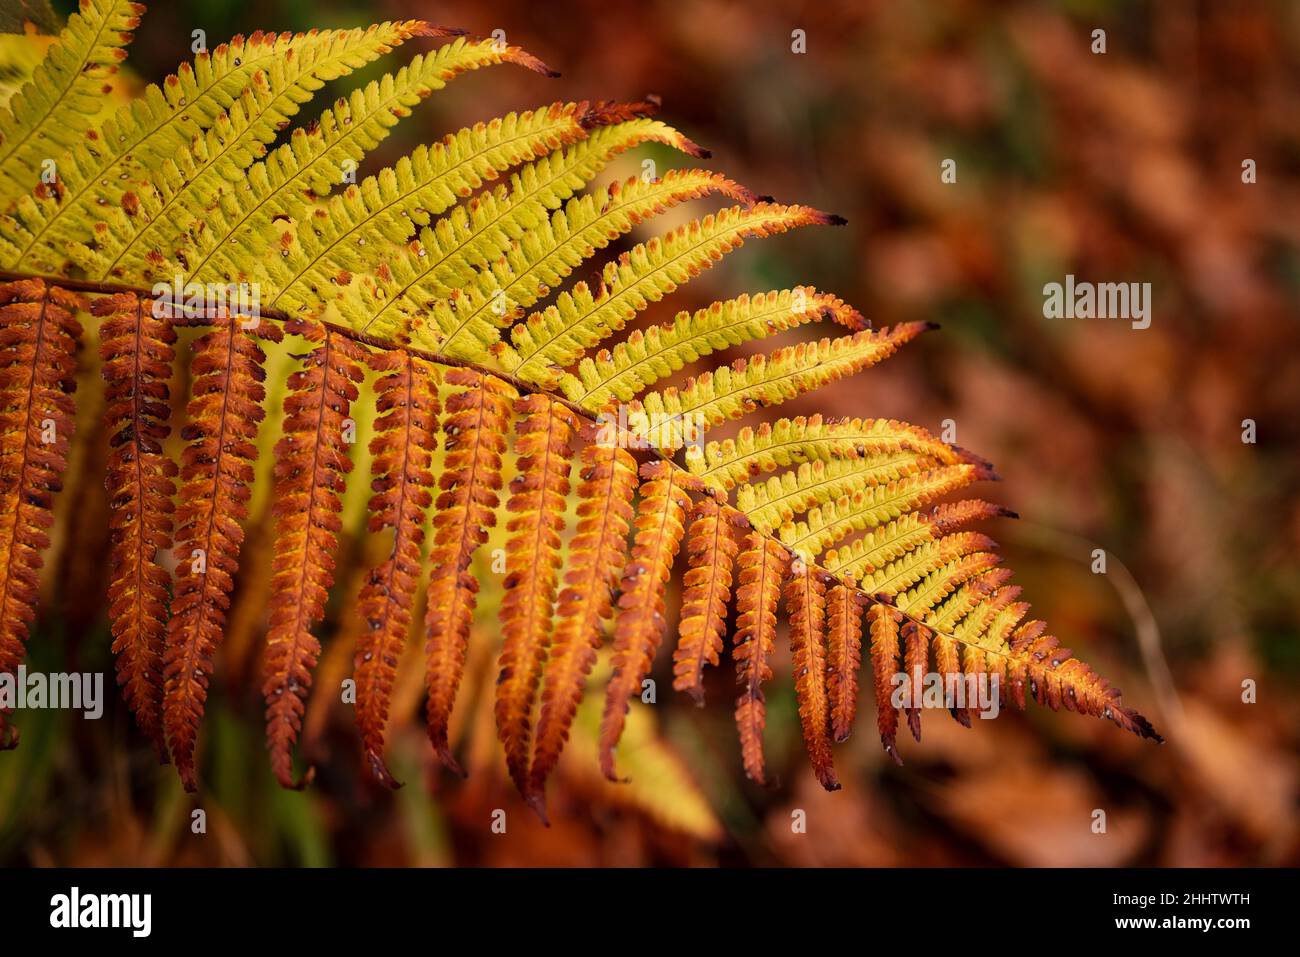 Full frame close-up of the two-colored fern frond of a common lady fern (Athyrium filix-femina) in an autumnal forest, suitable as natural background Stock Photo